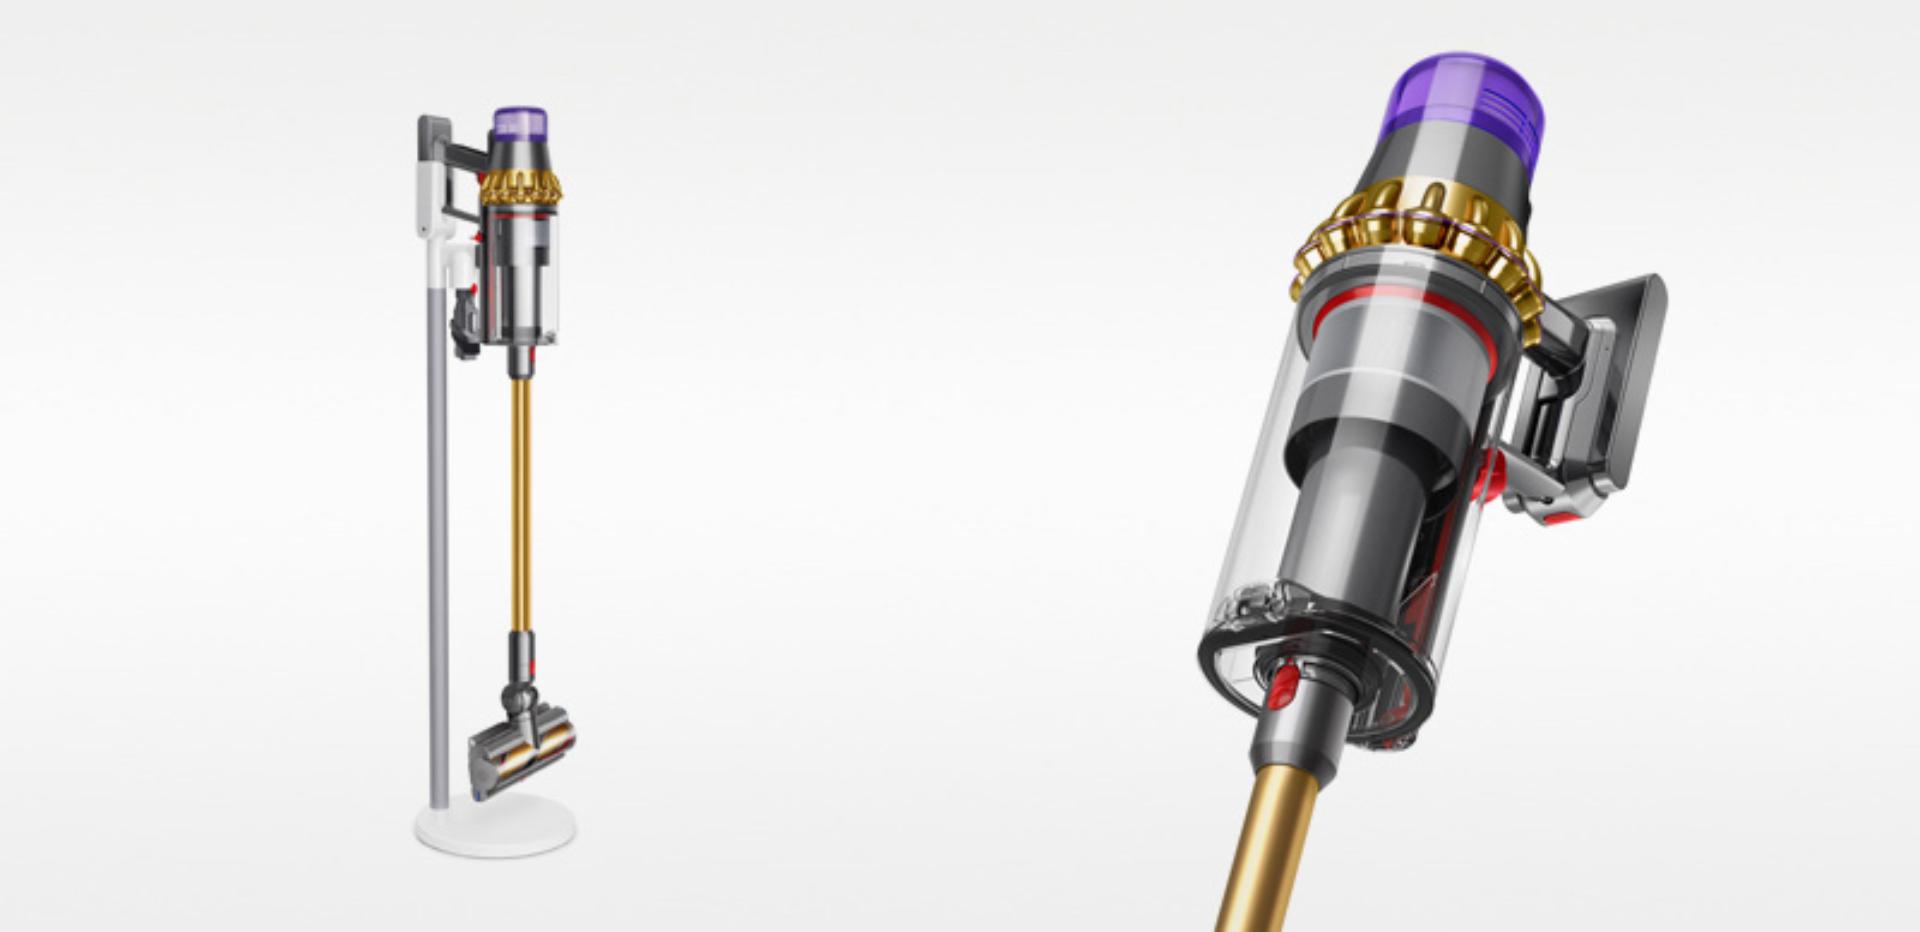 Dyson Outsize Absolute Extra vacuum cleaner